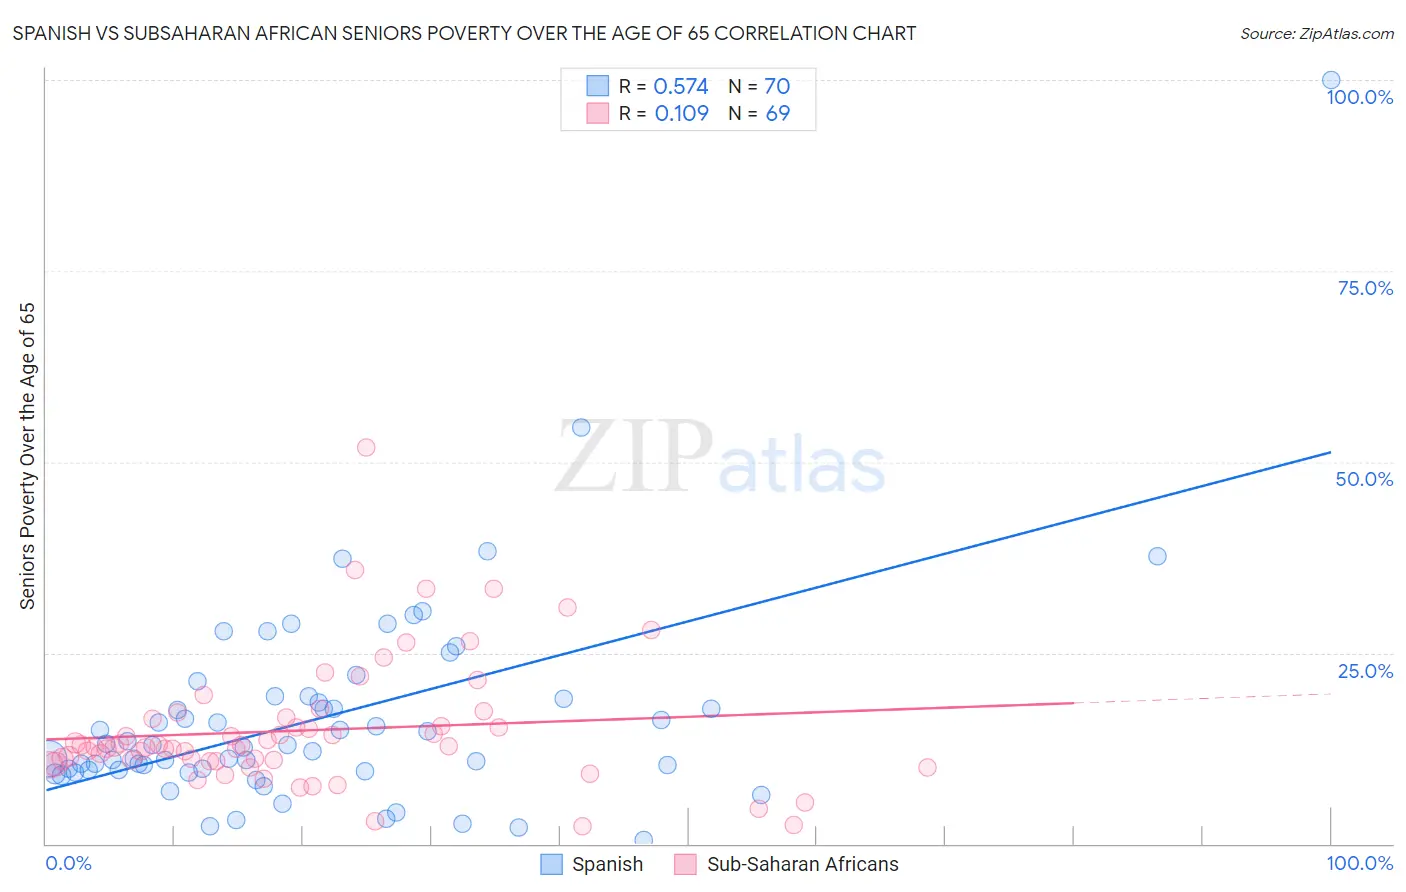 Spanish vs Subsaharan African Seniors Poverty Over the Age of 65